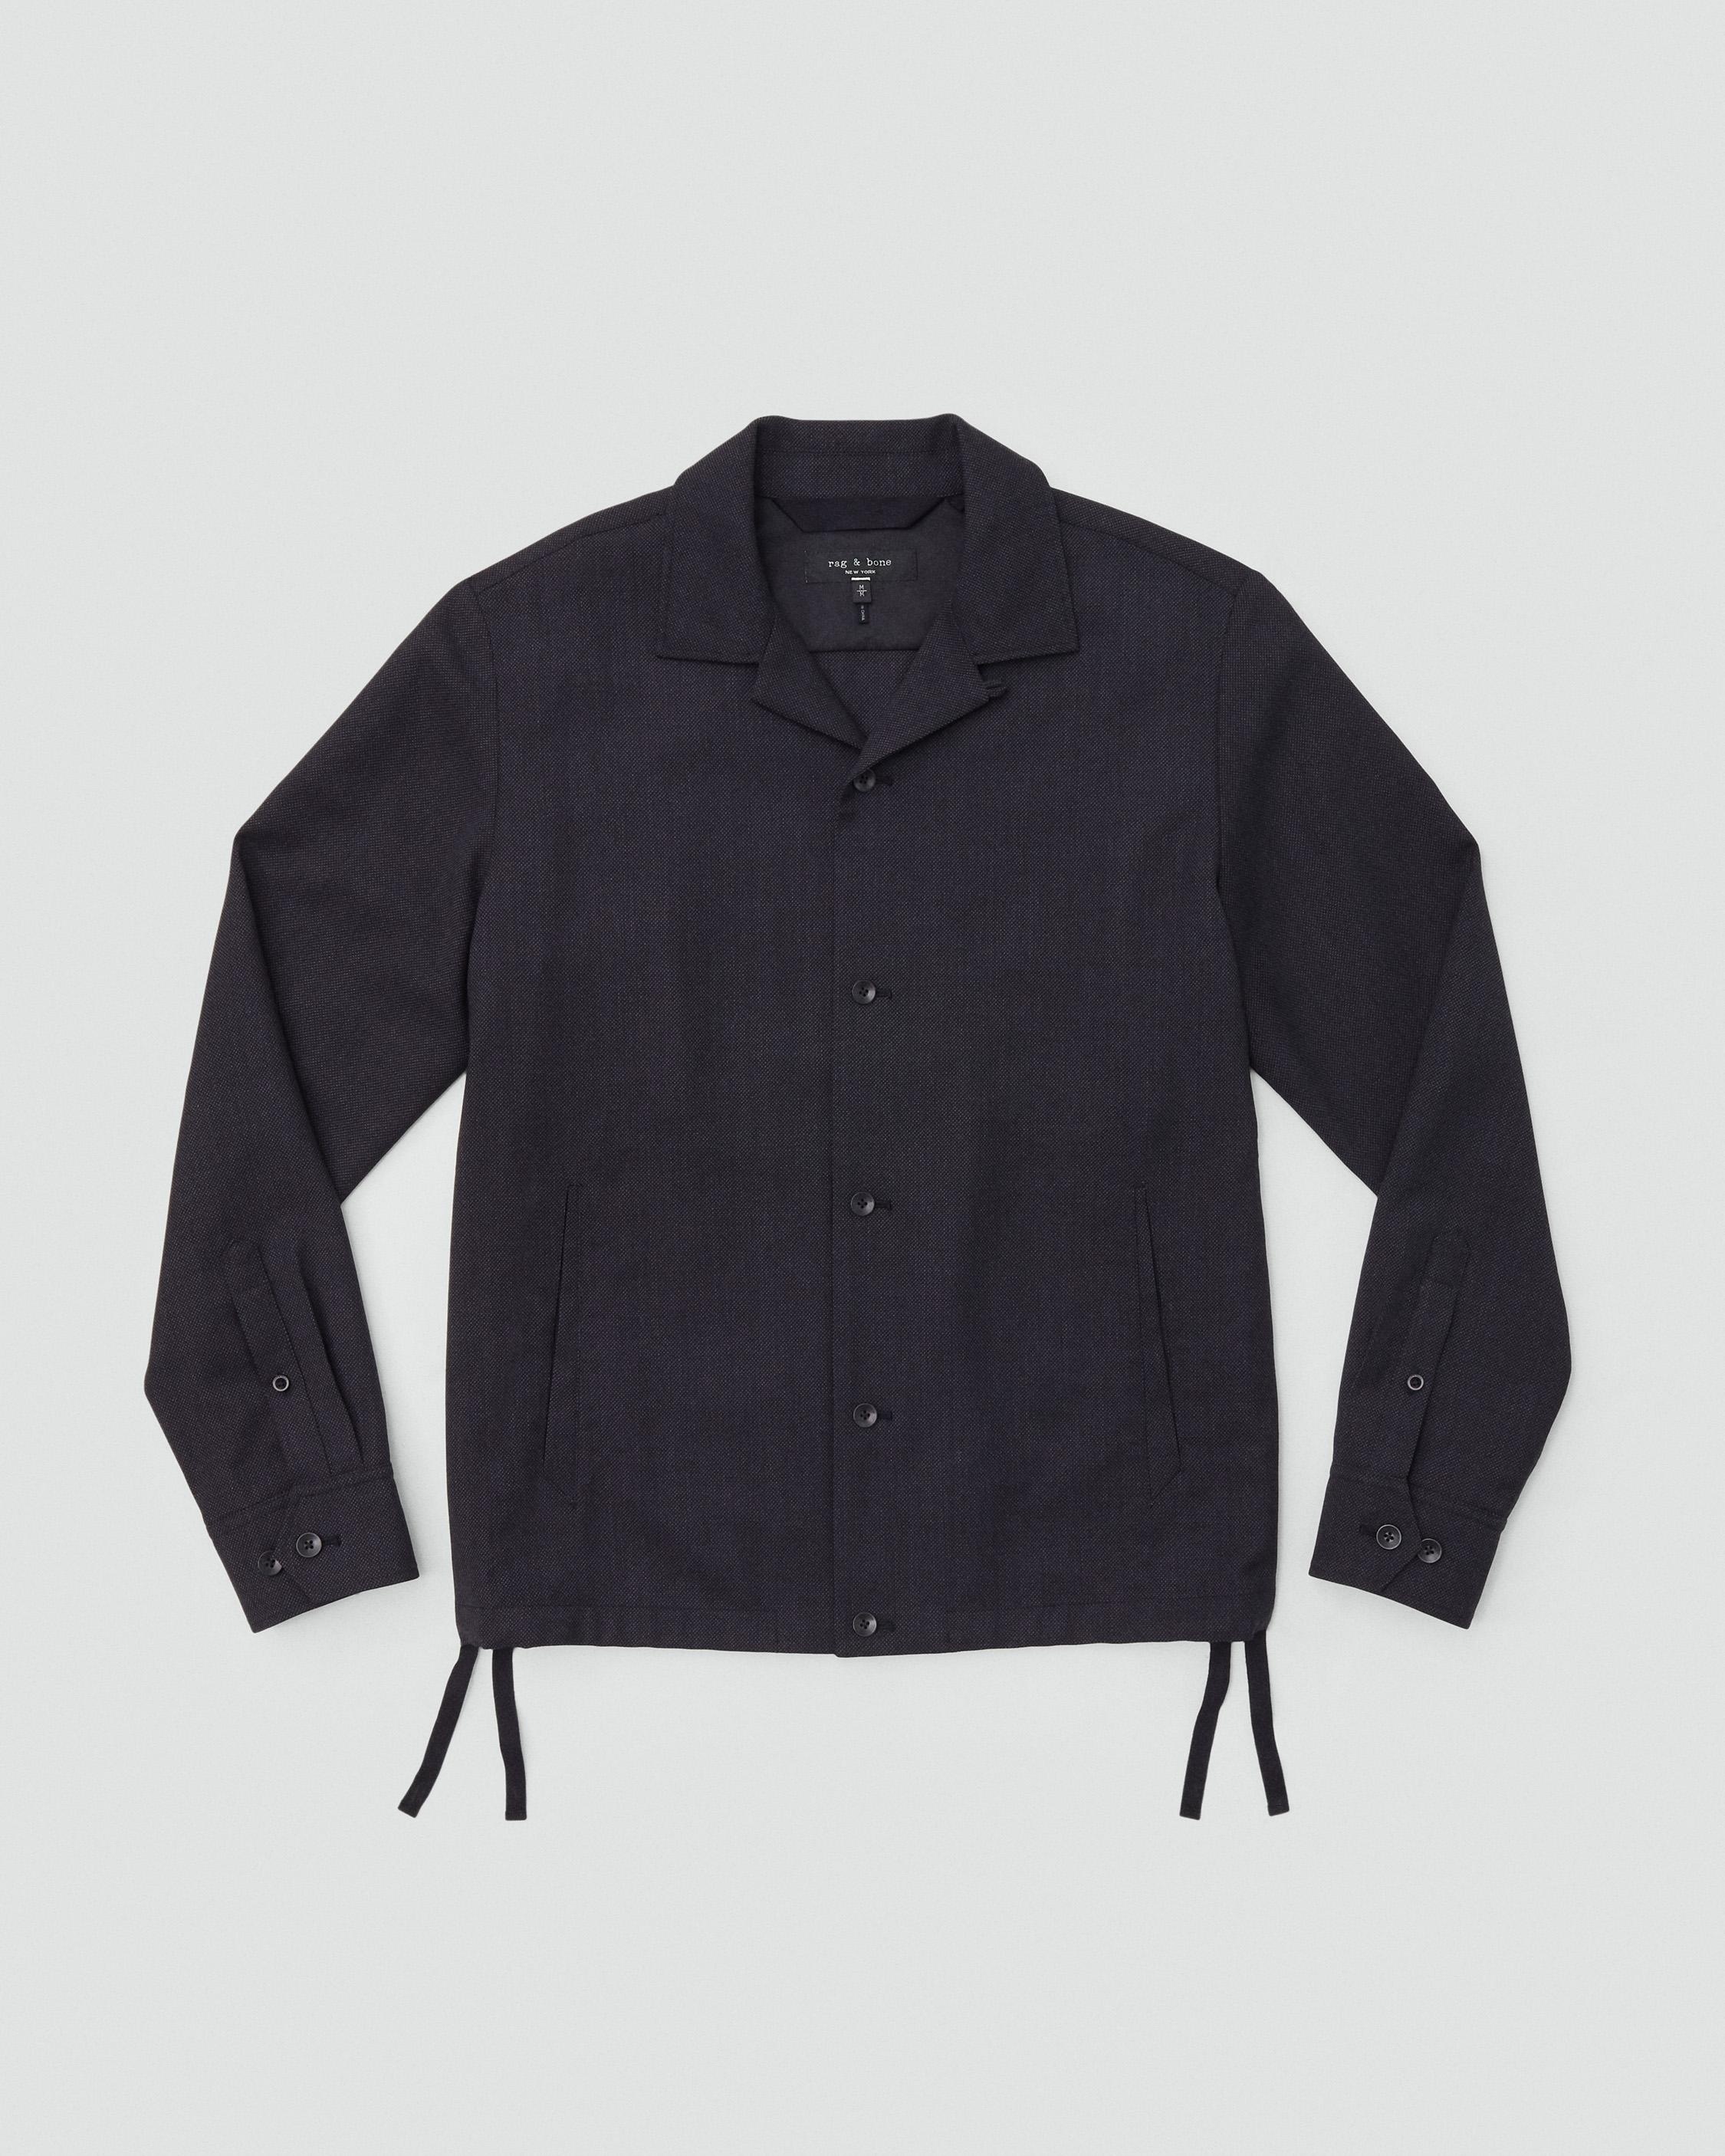 Finlay Wool Shirt Jacket
Relaxed Fit - 1